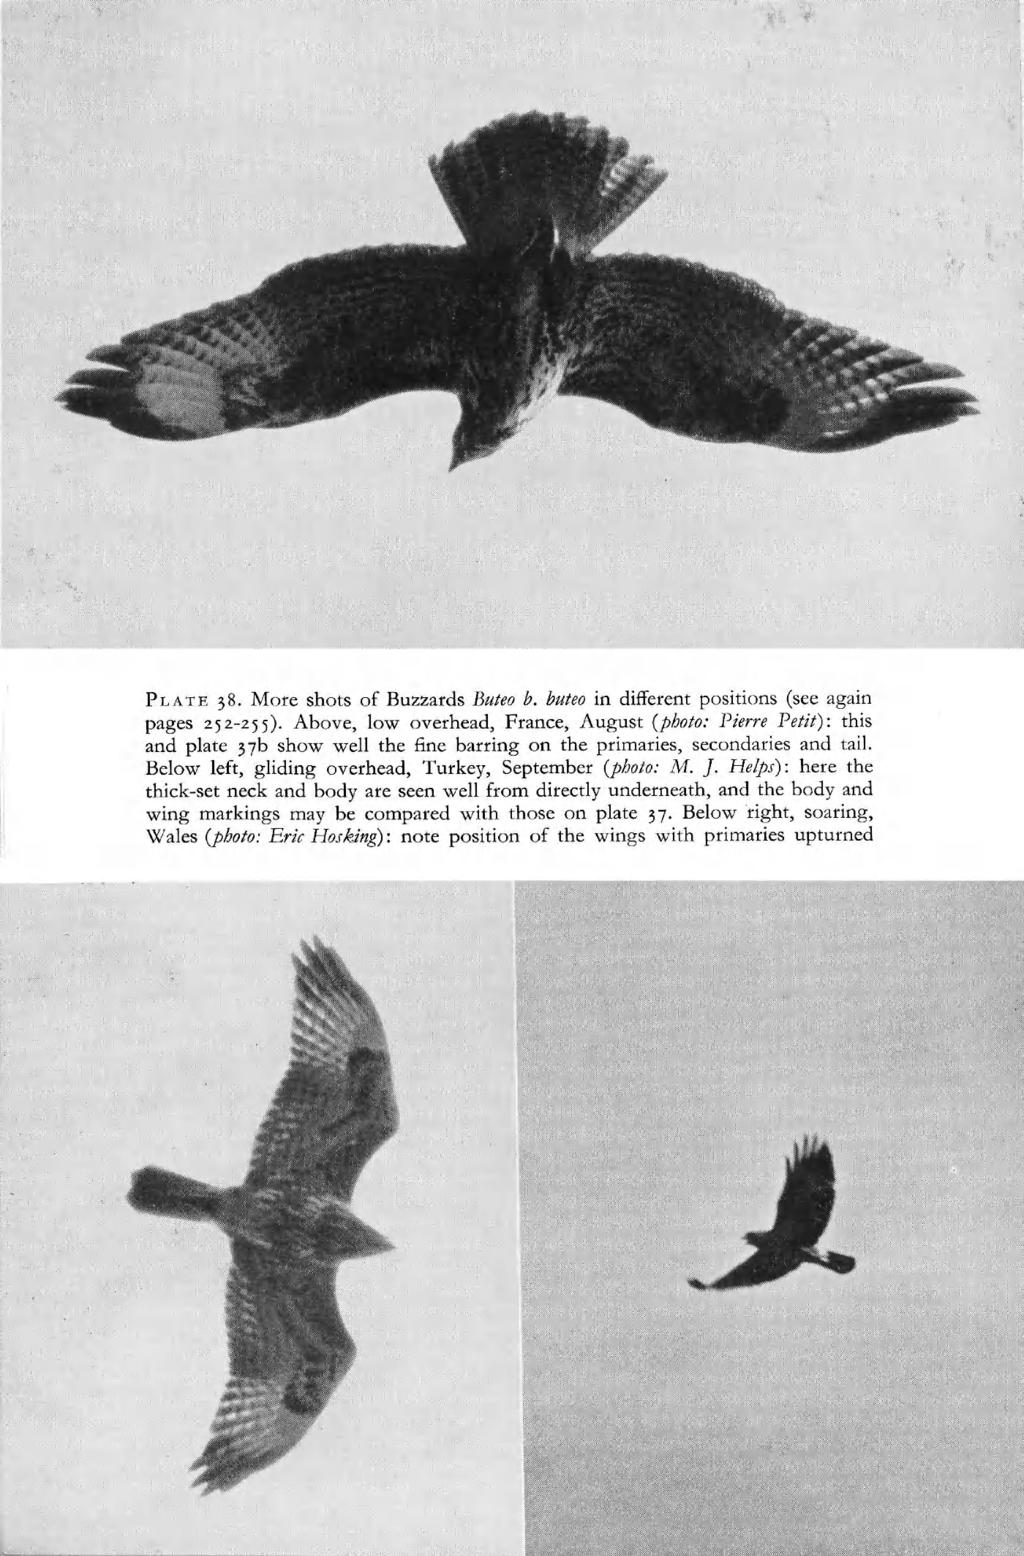 PLATE 38. More shots of Buzzards Buteo b. buteo in different positions (see again pages 252-255).